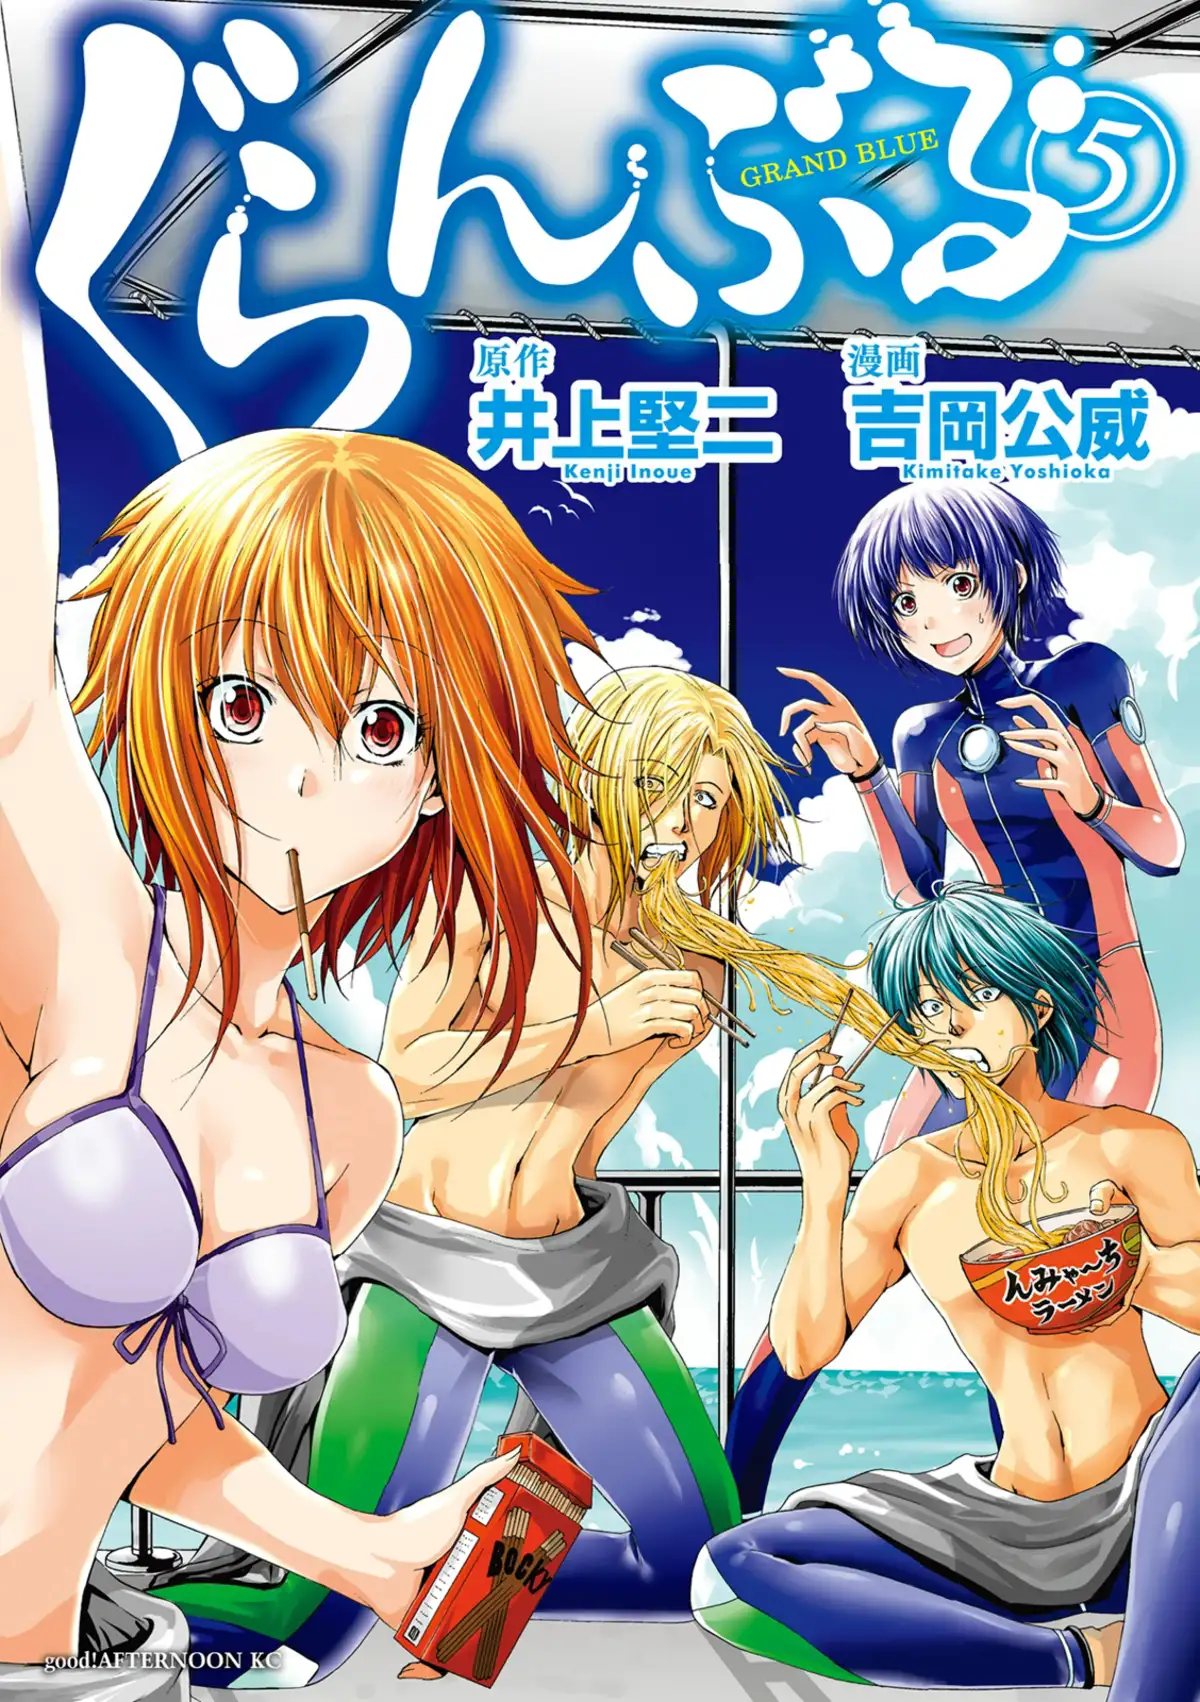 Grand Blue Volume 5 page 1